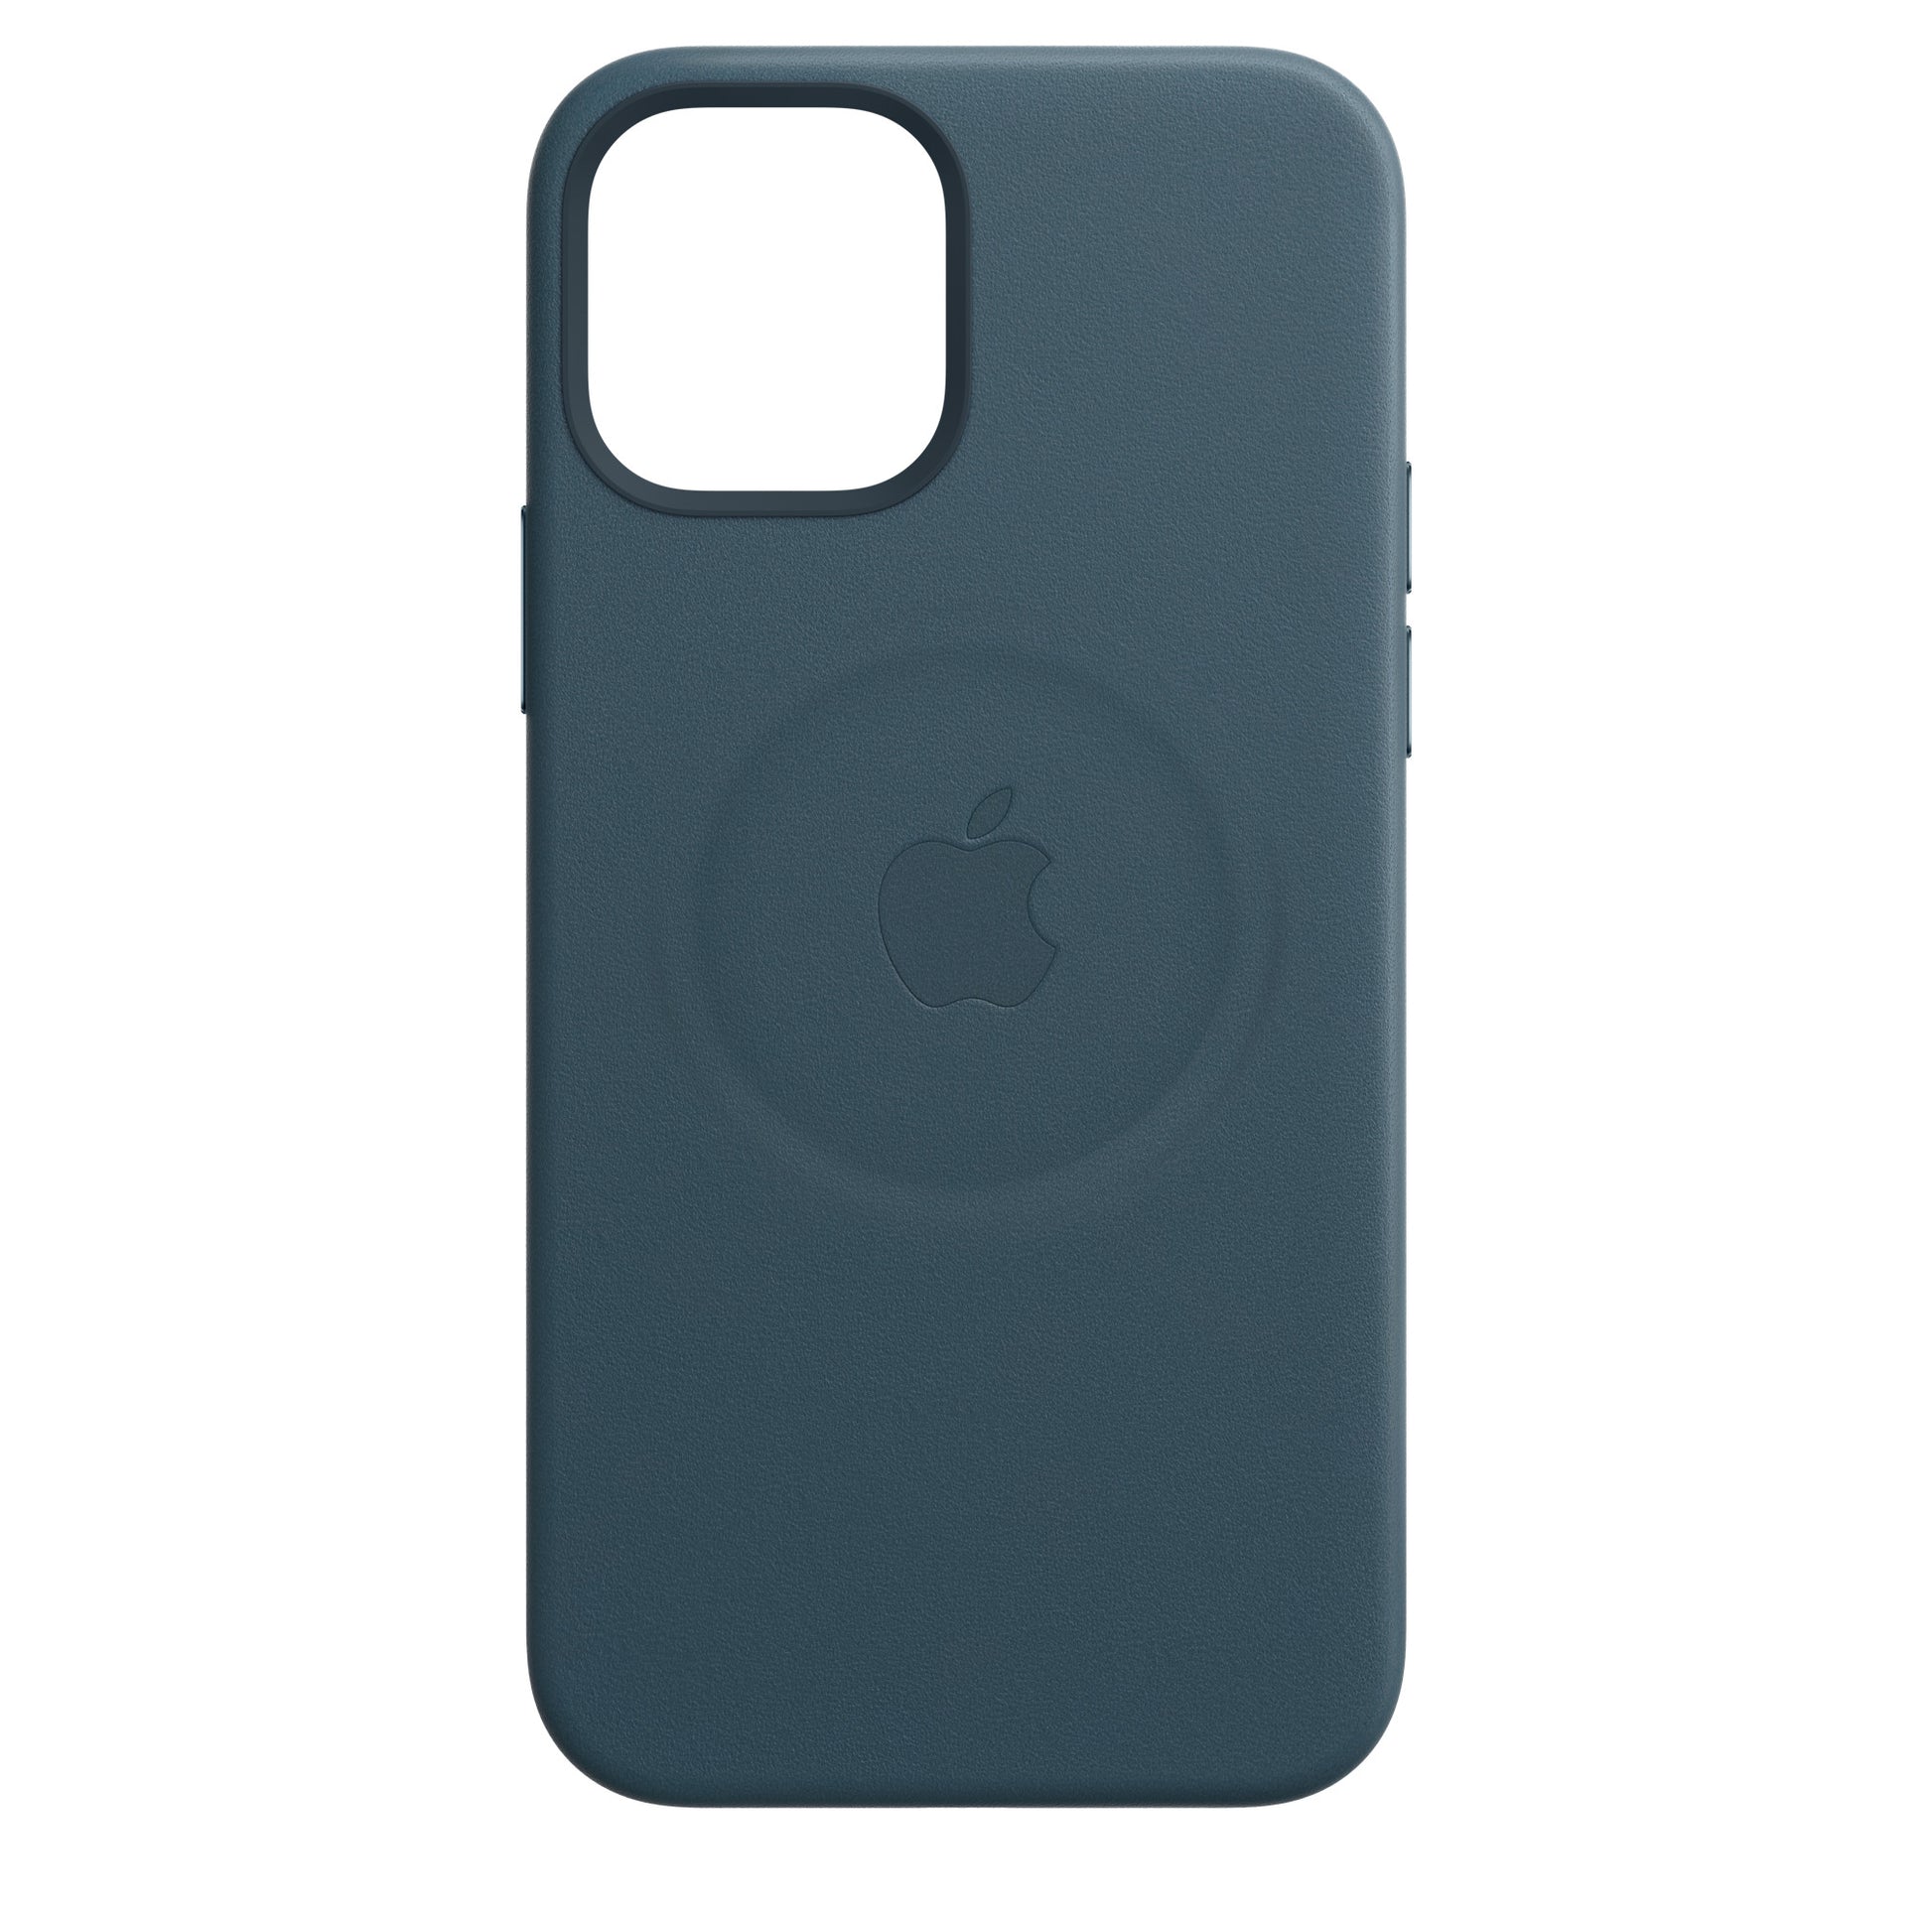 Apple iPhone 12 Pro Max Leather Case Deep Baltic Blue